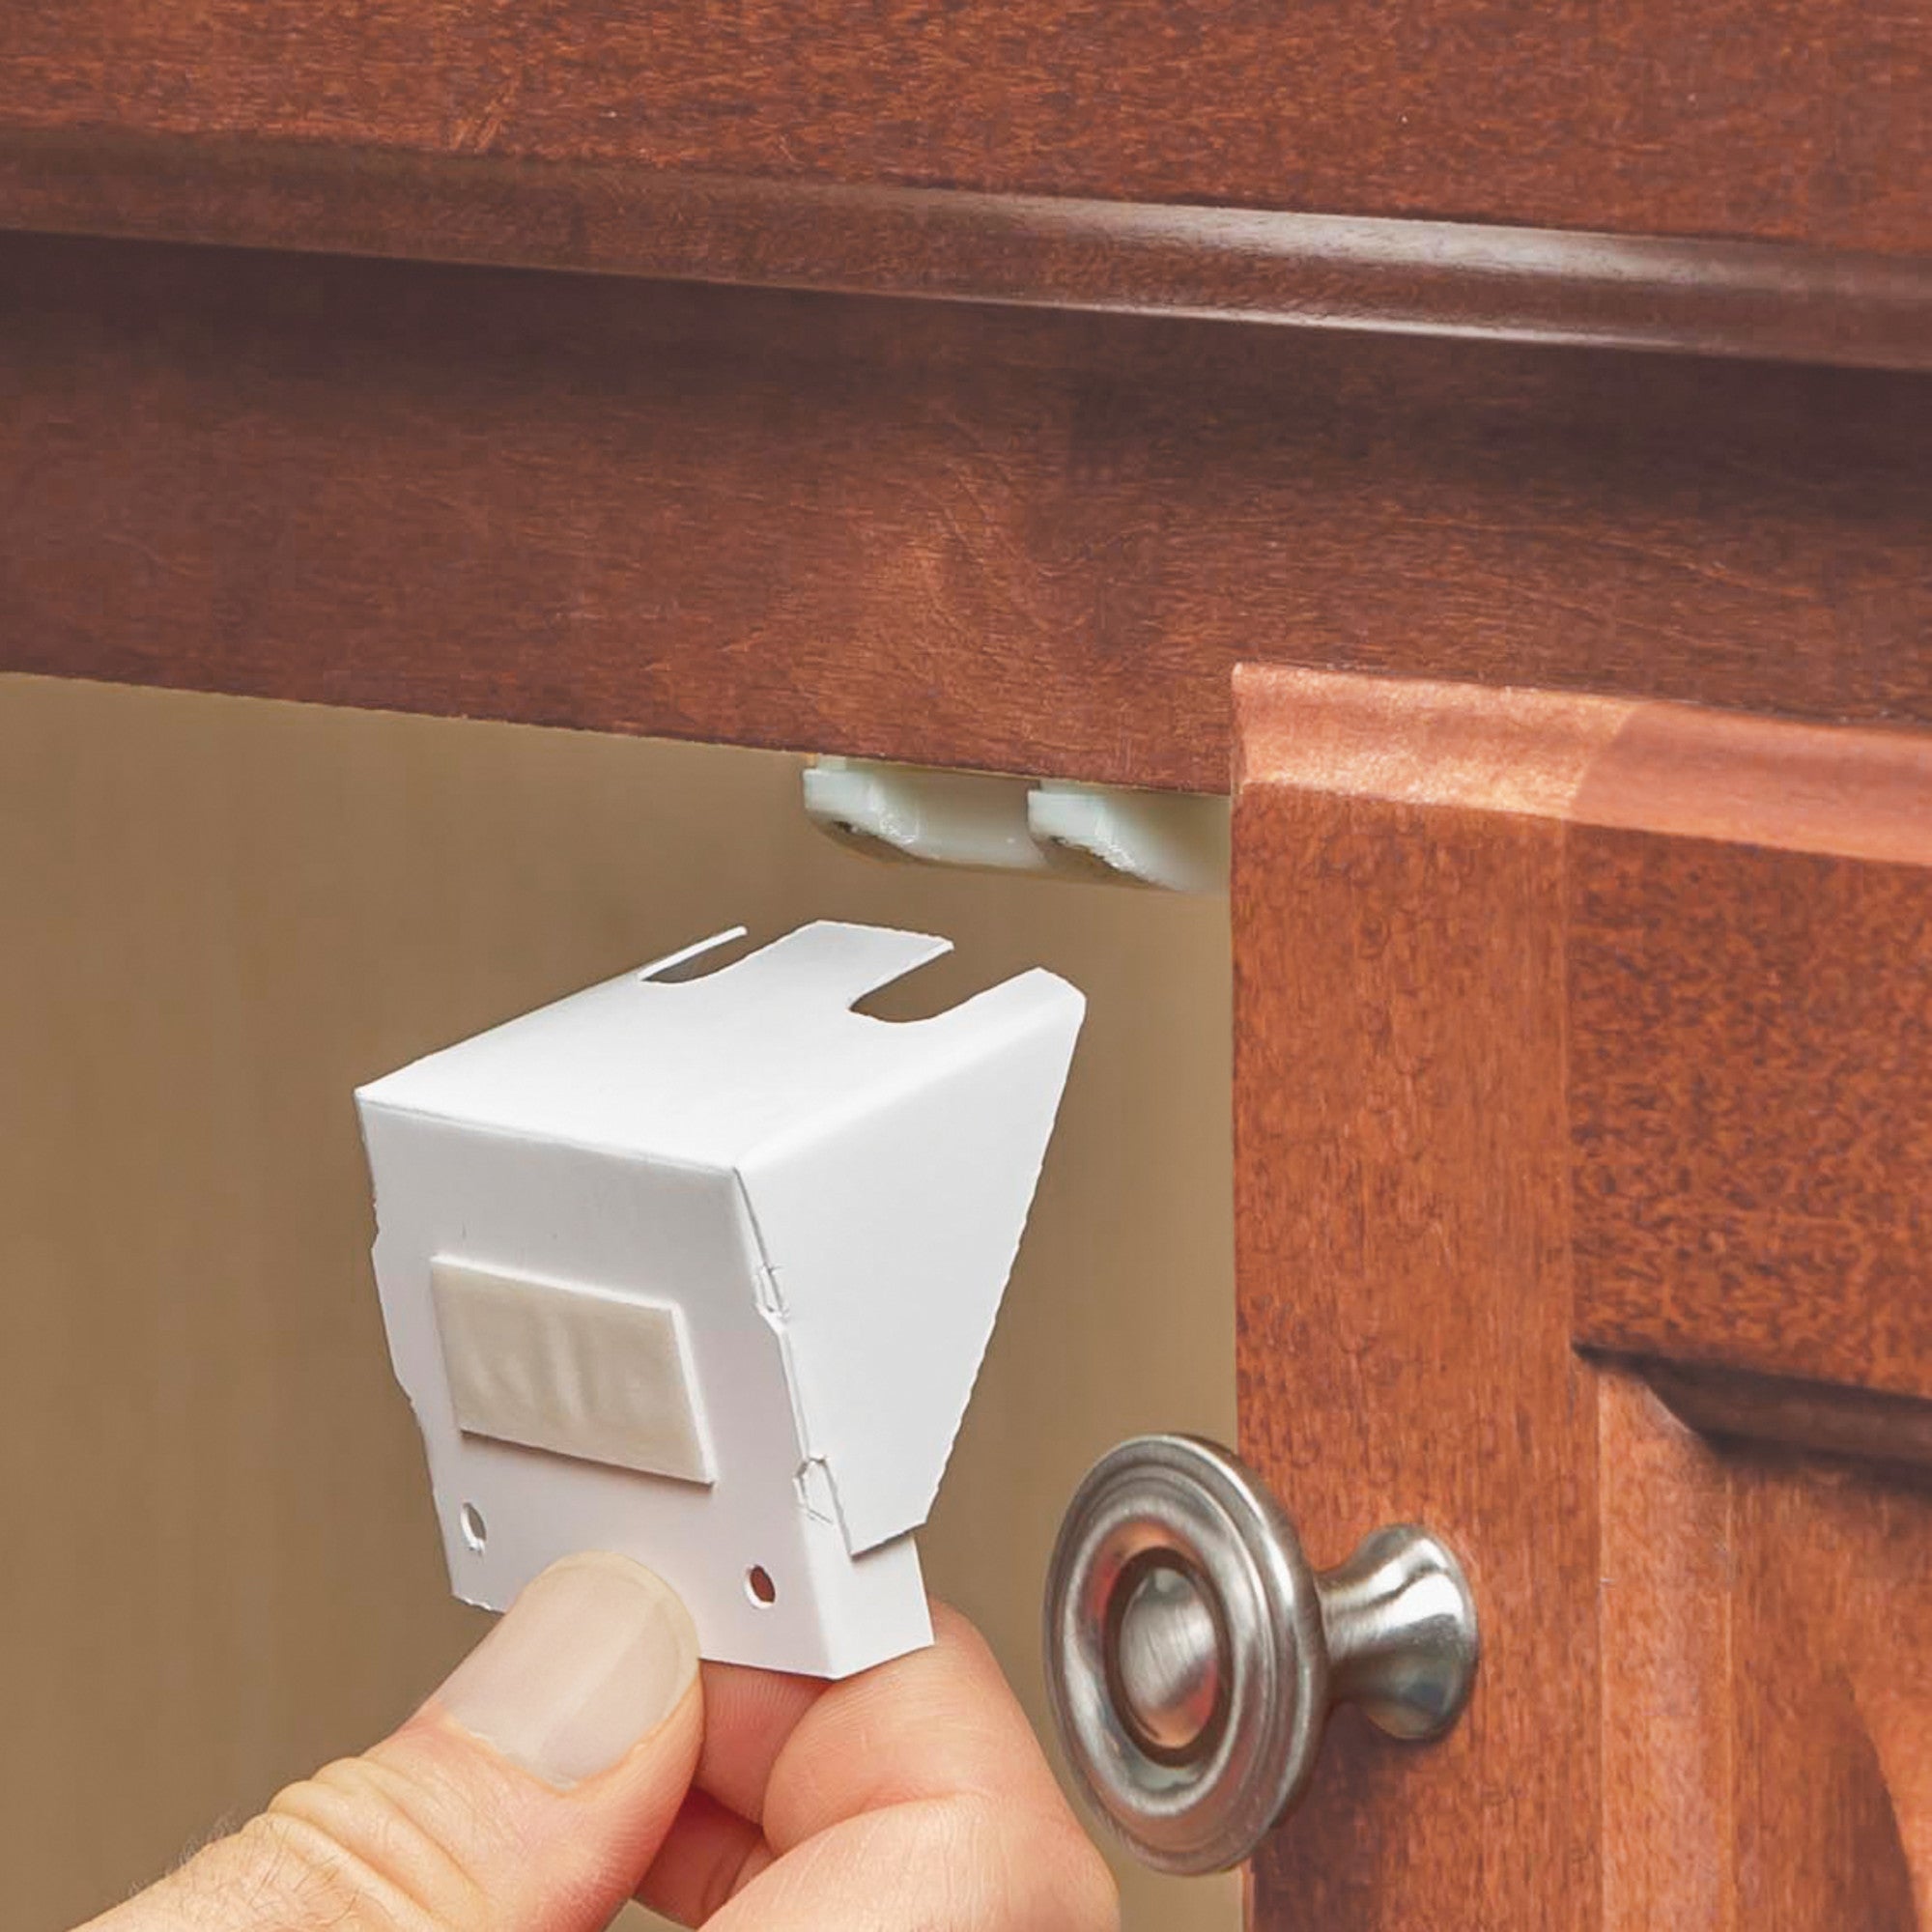 Cabinet latch being installed on a cabinet